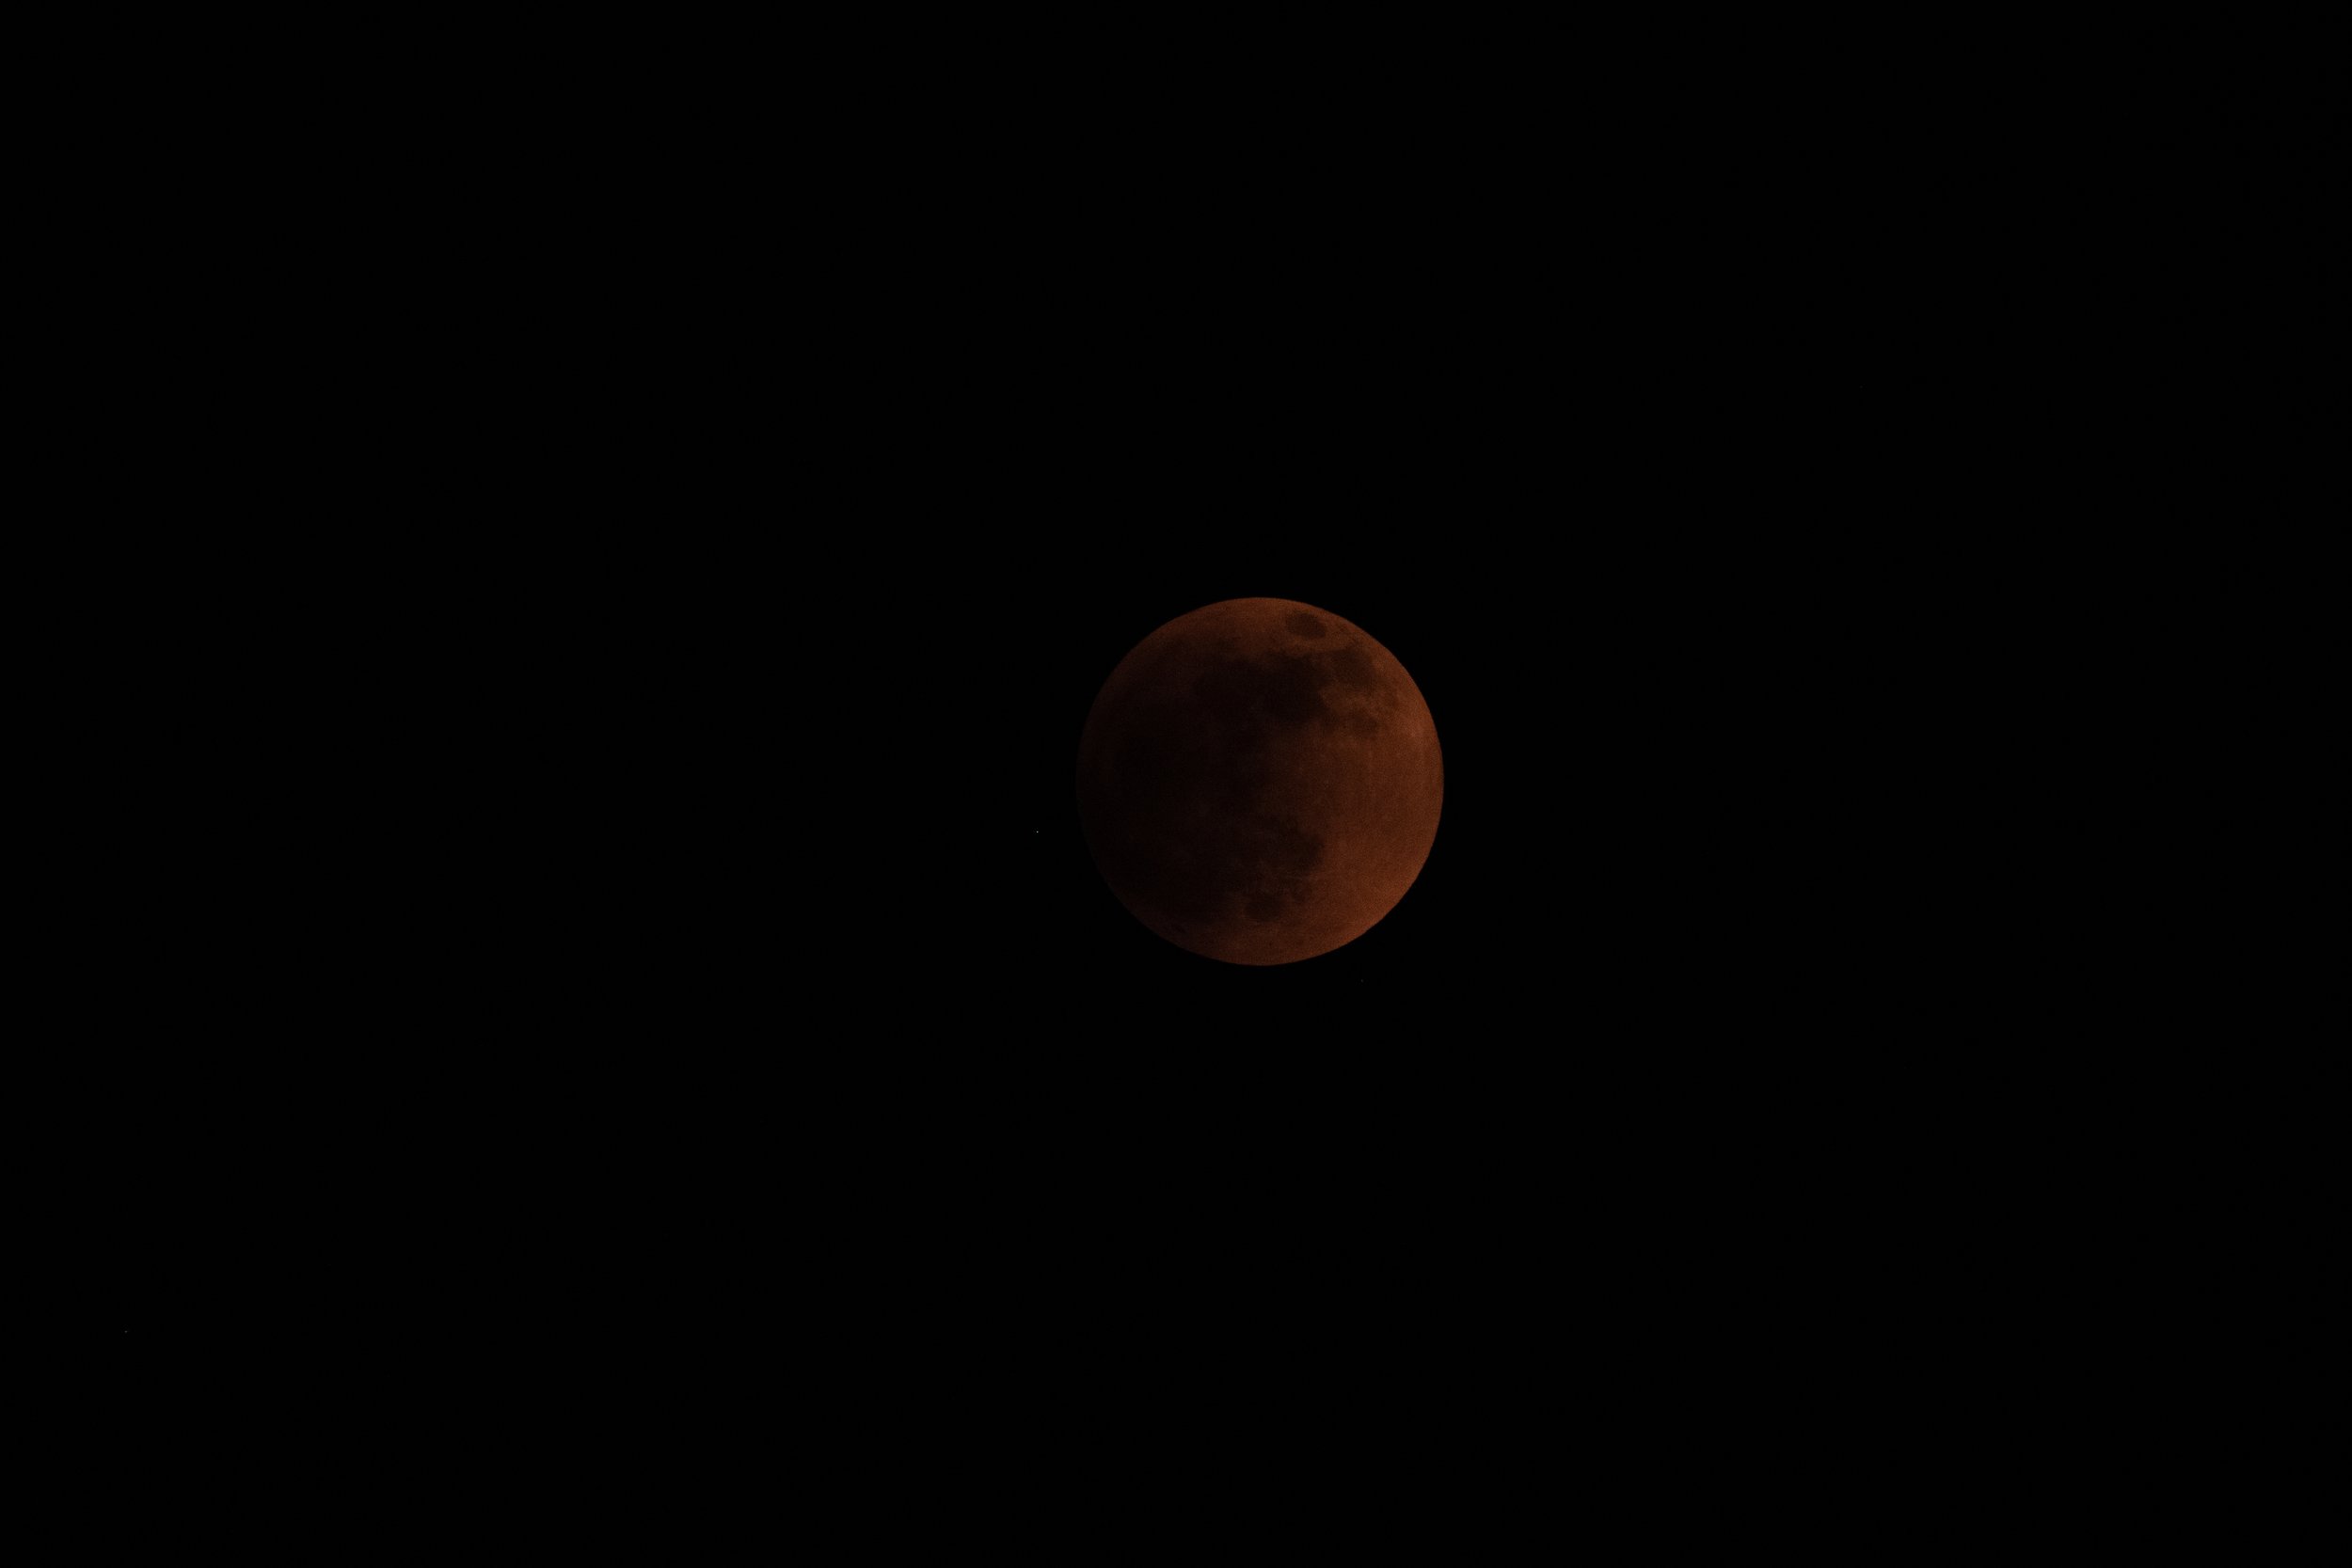  Image of the moon taken during a lunar eclipse 